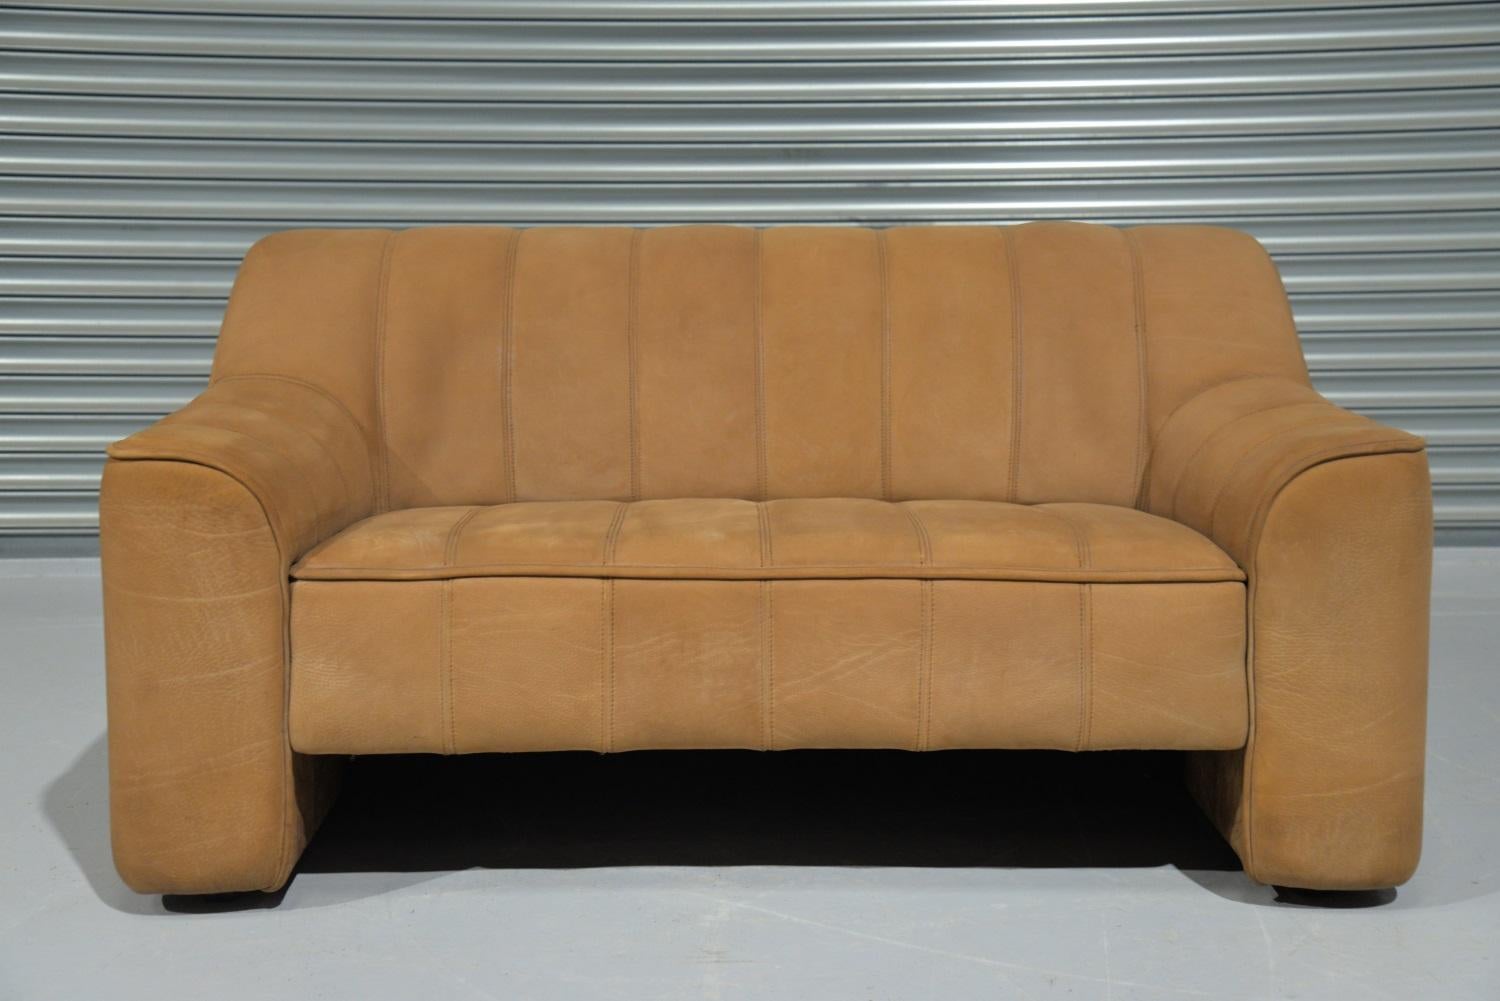 Discounted airfreight for our US and International customers (from 2 weeks door to door)

We are delighted to bring to you a vintage 1970`s De Sede DS 44 two-seat sofa or loveseat in thick buffalo leather with a soft silky texture similar to suede.